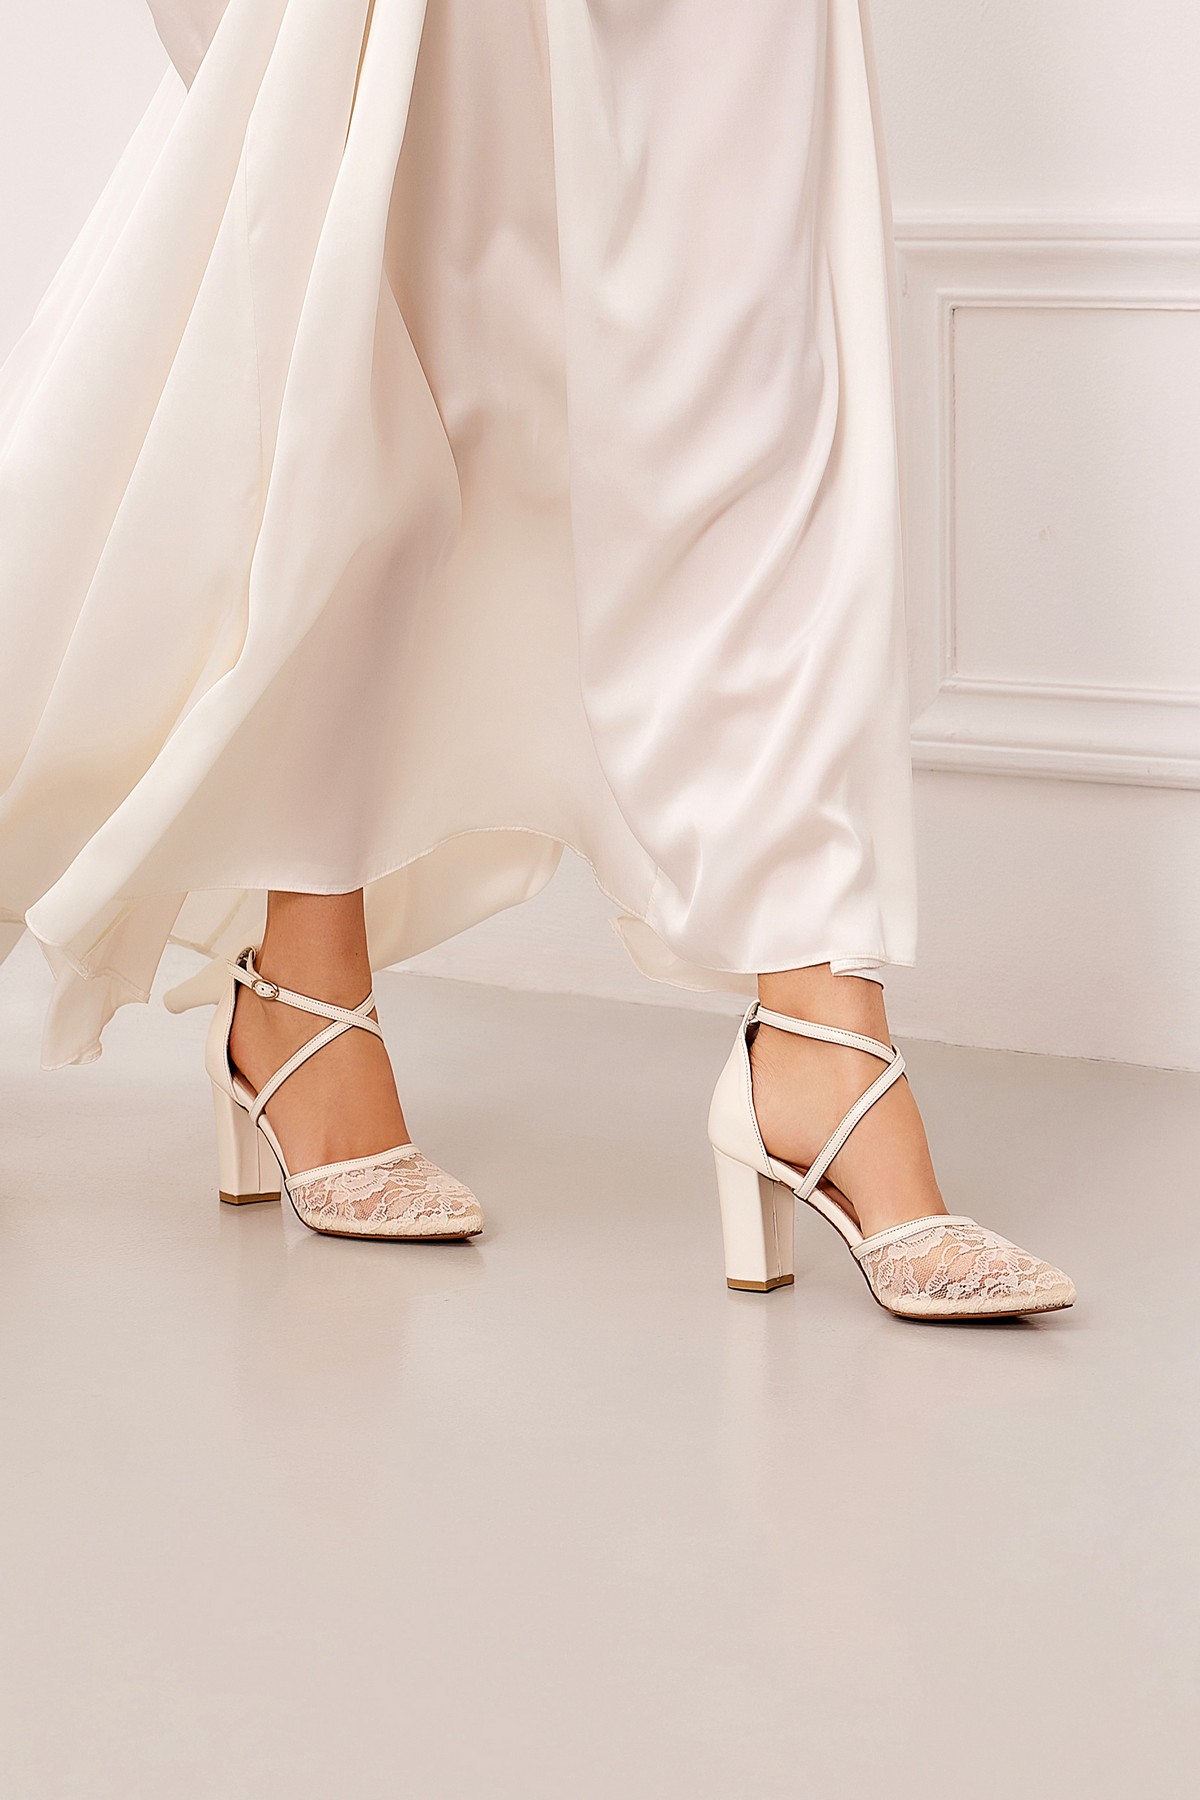 Pointed toe lace wedding shoes with ankle strap